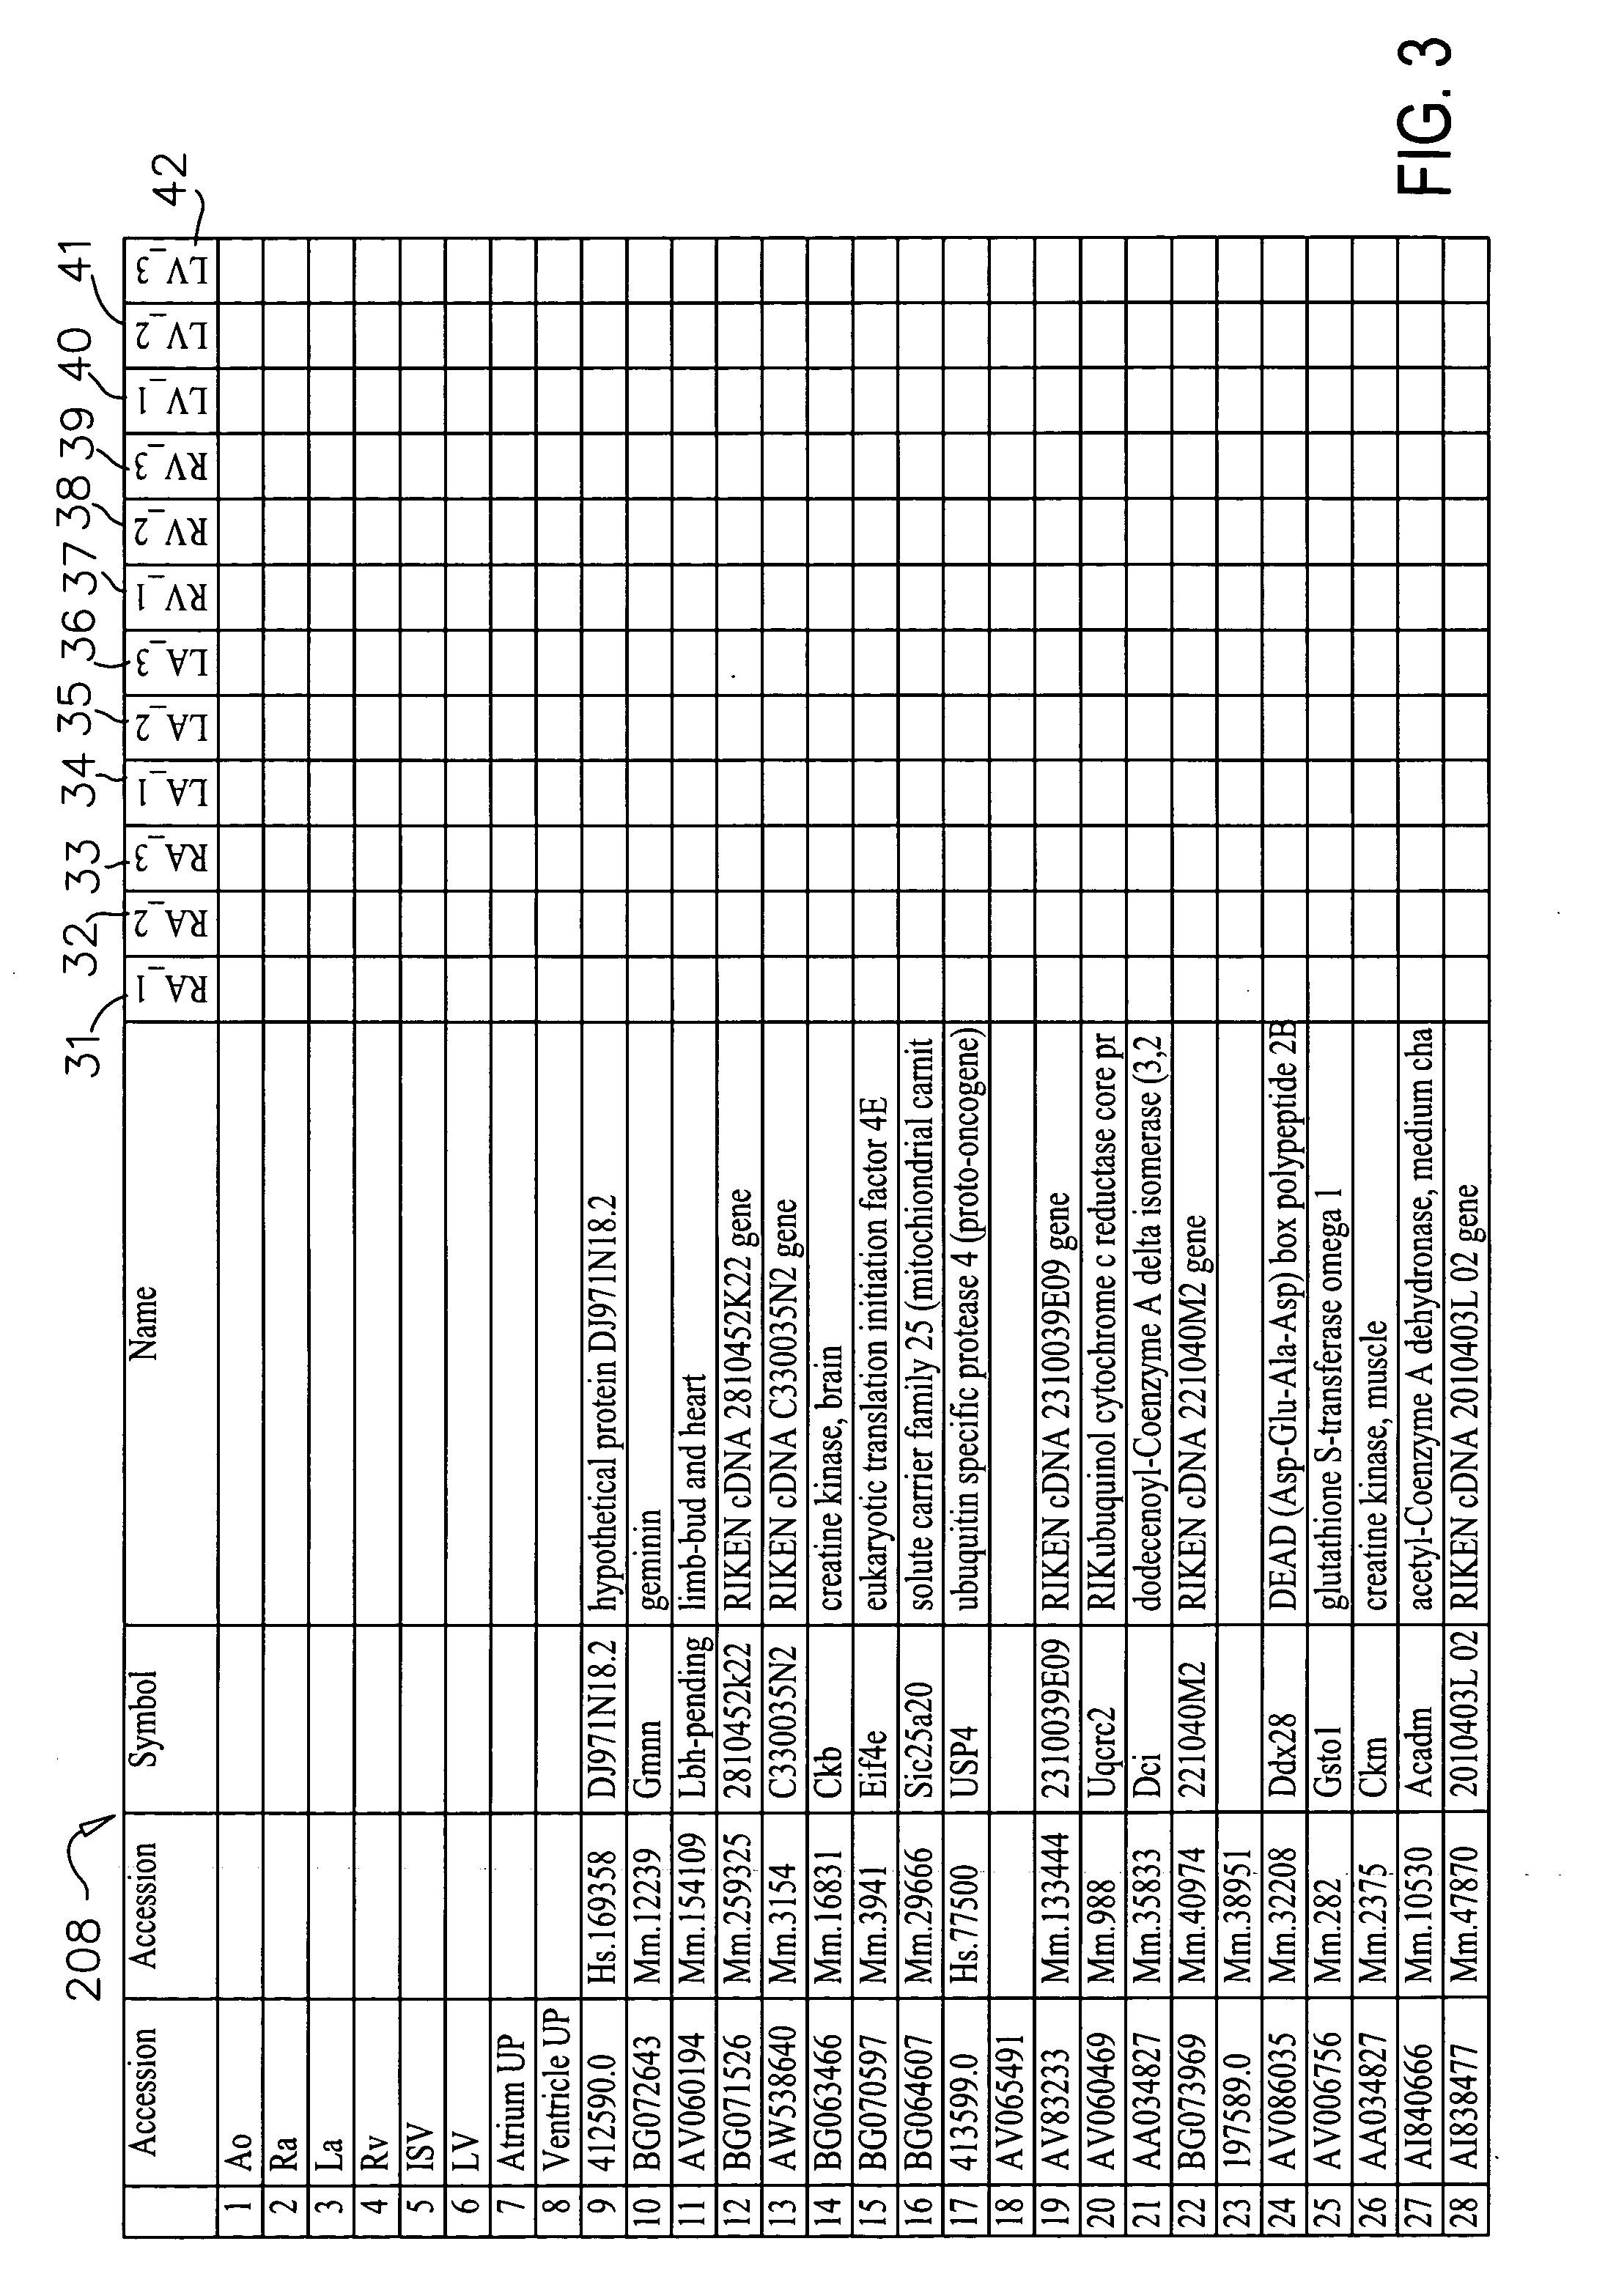 Methods and systems for extension, exploration, refinement, and analysis of biological networks